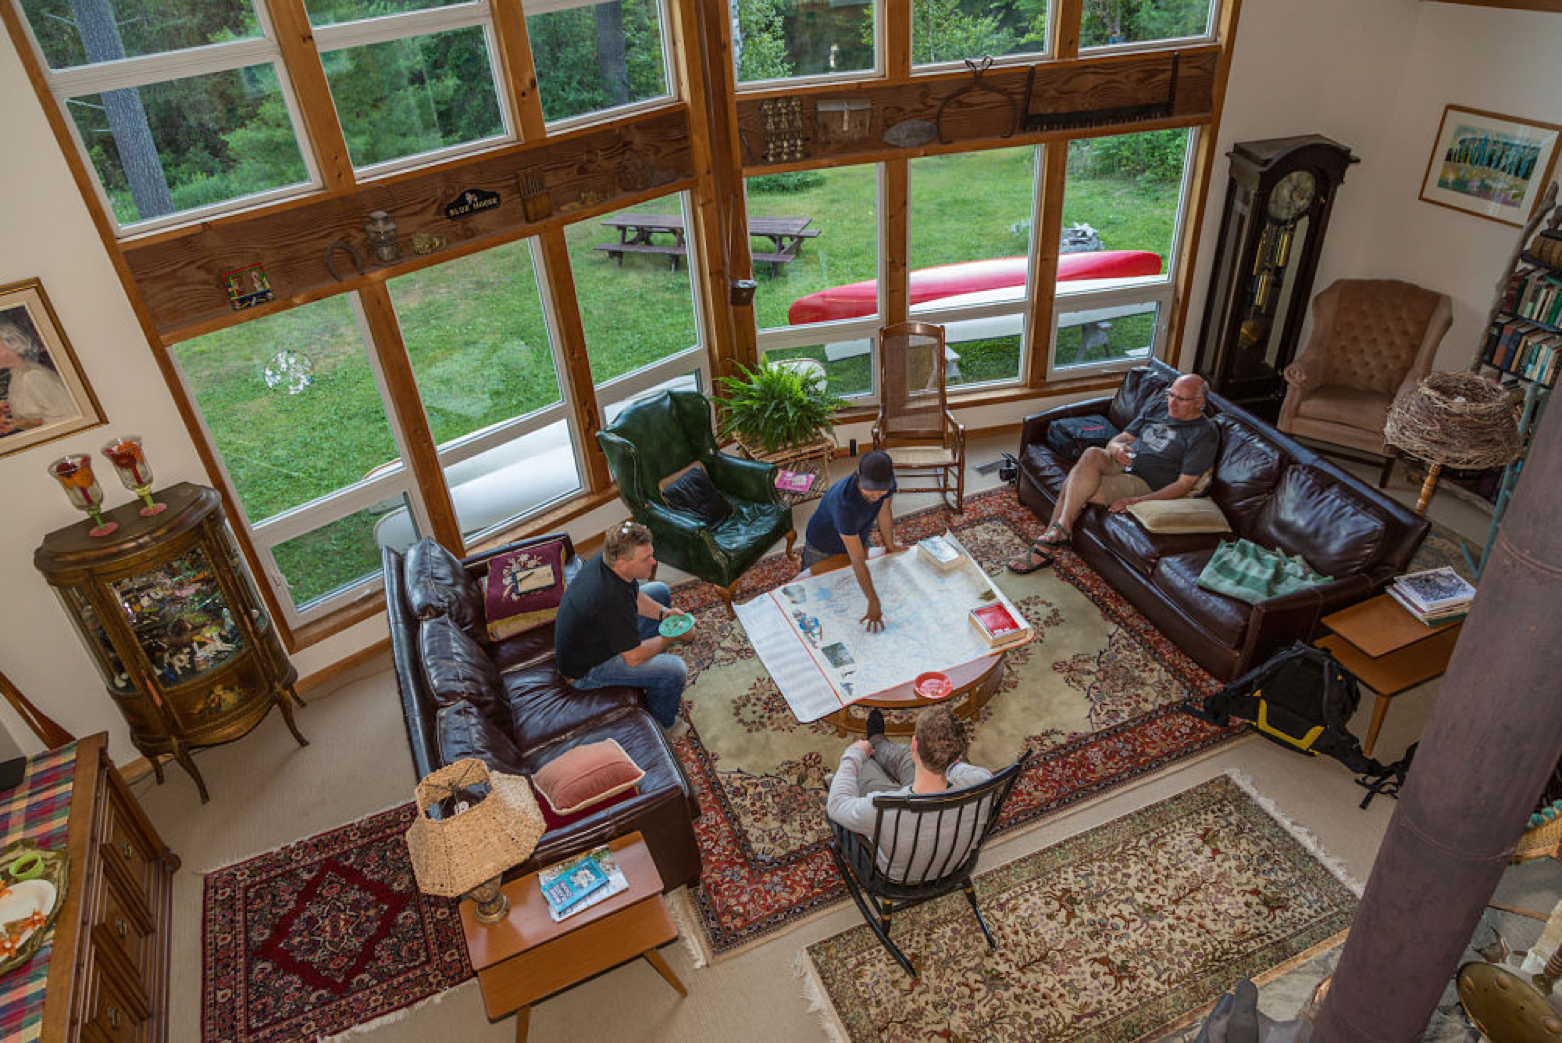 A high shot looking down on a family in a large cabin sitting room, sitting on couches around a coffee table. There are tall windows that fill one wall, and outside there is green grass, forest and canoes.